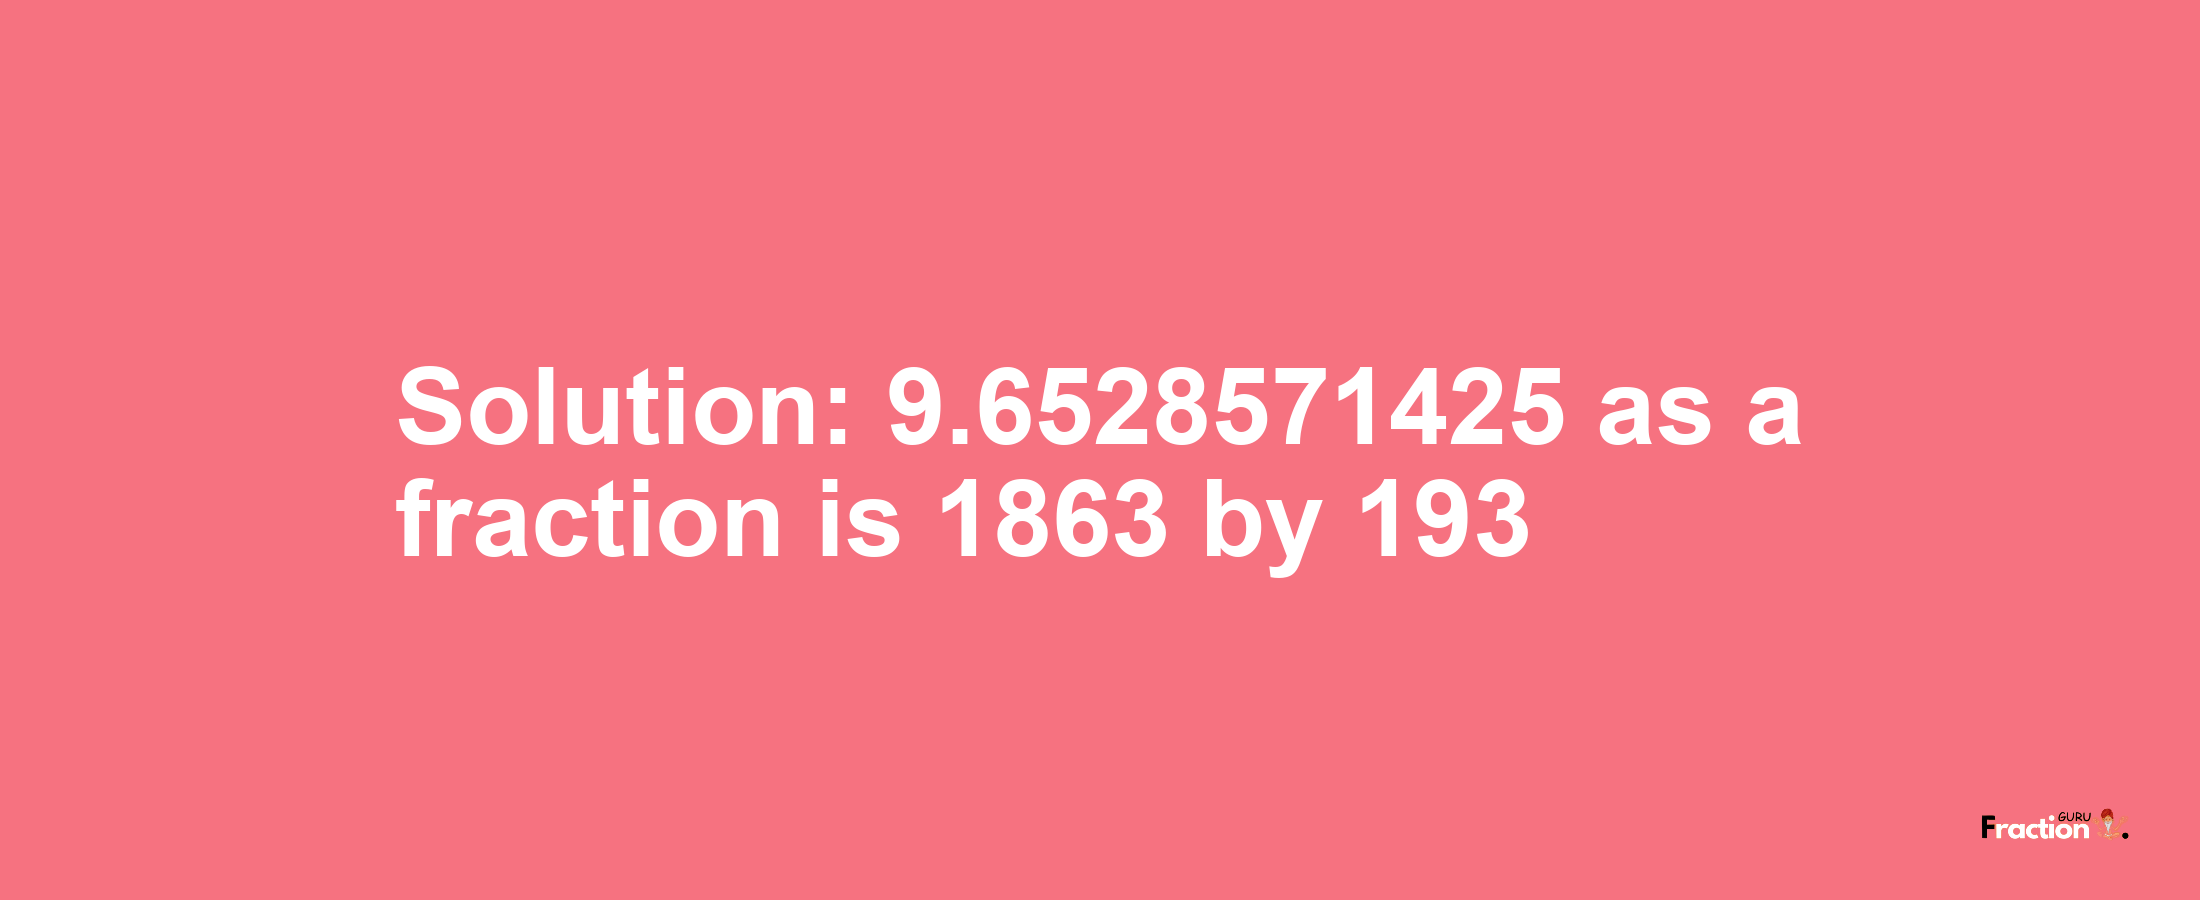 Solution:9.6528571425 as a fraction is 1863/193